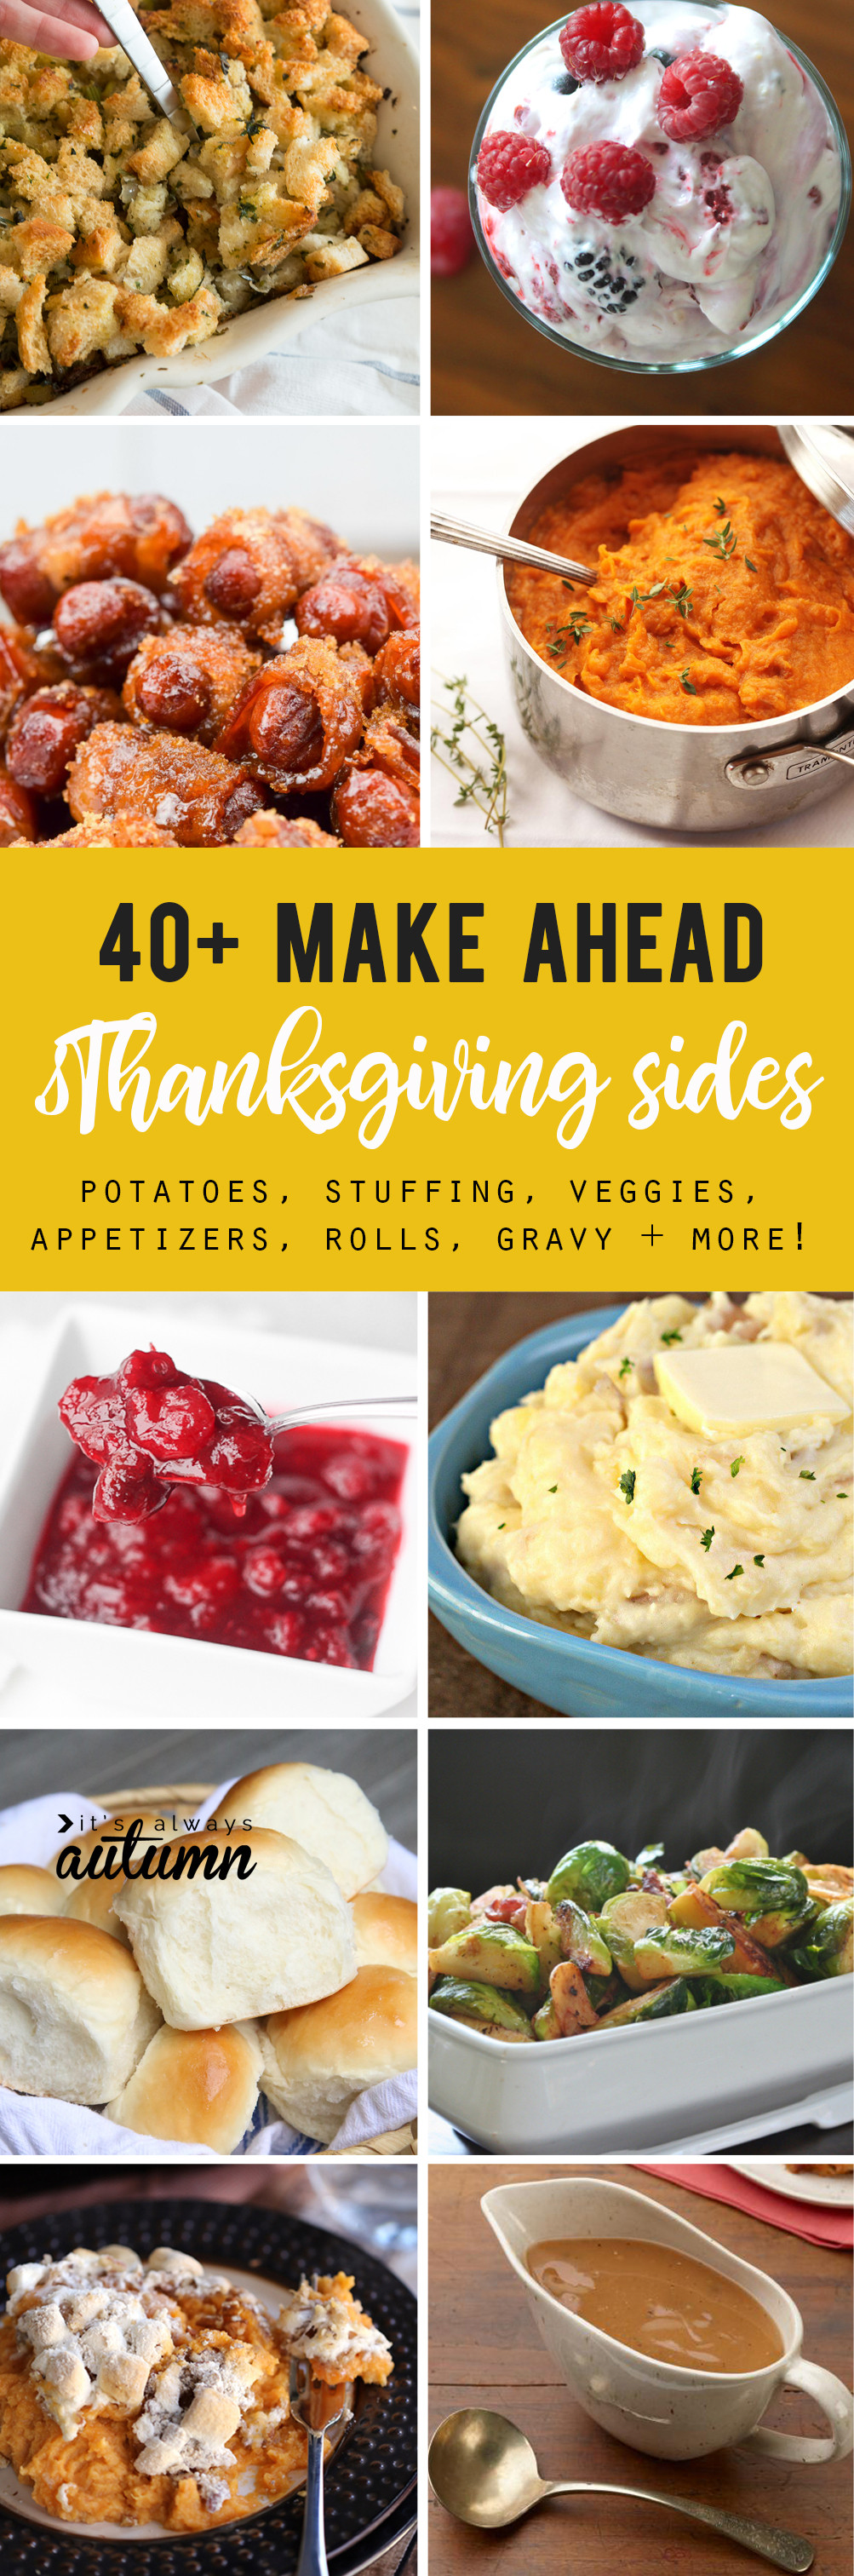 Make Ahead Thanksgiving Dishes
 the BEST LIST of Thanksgiving side dishes you can make